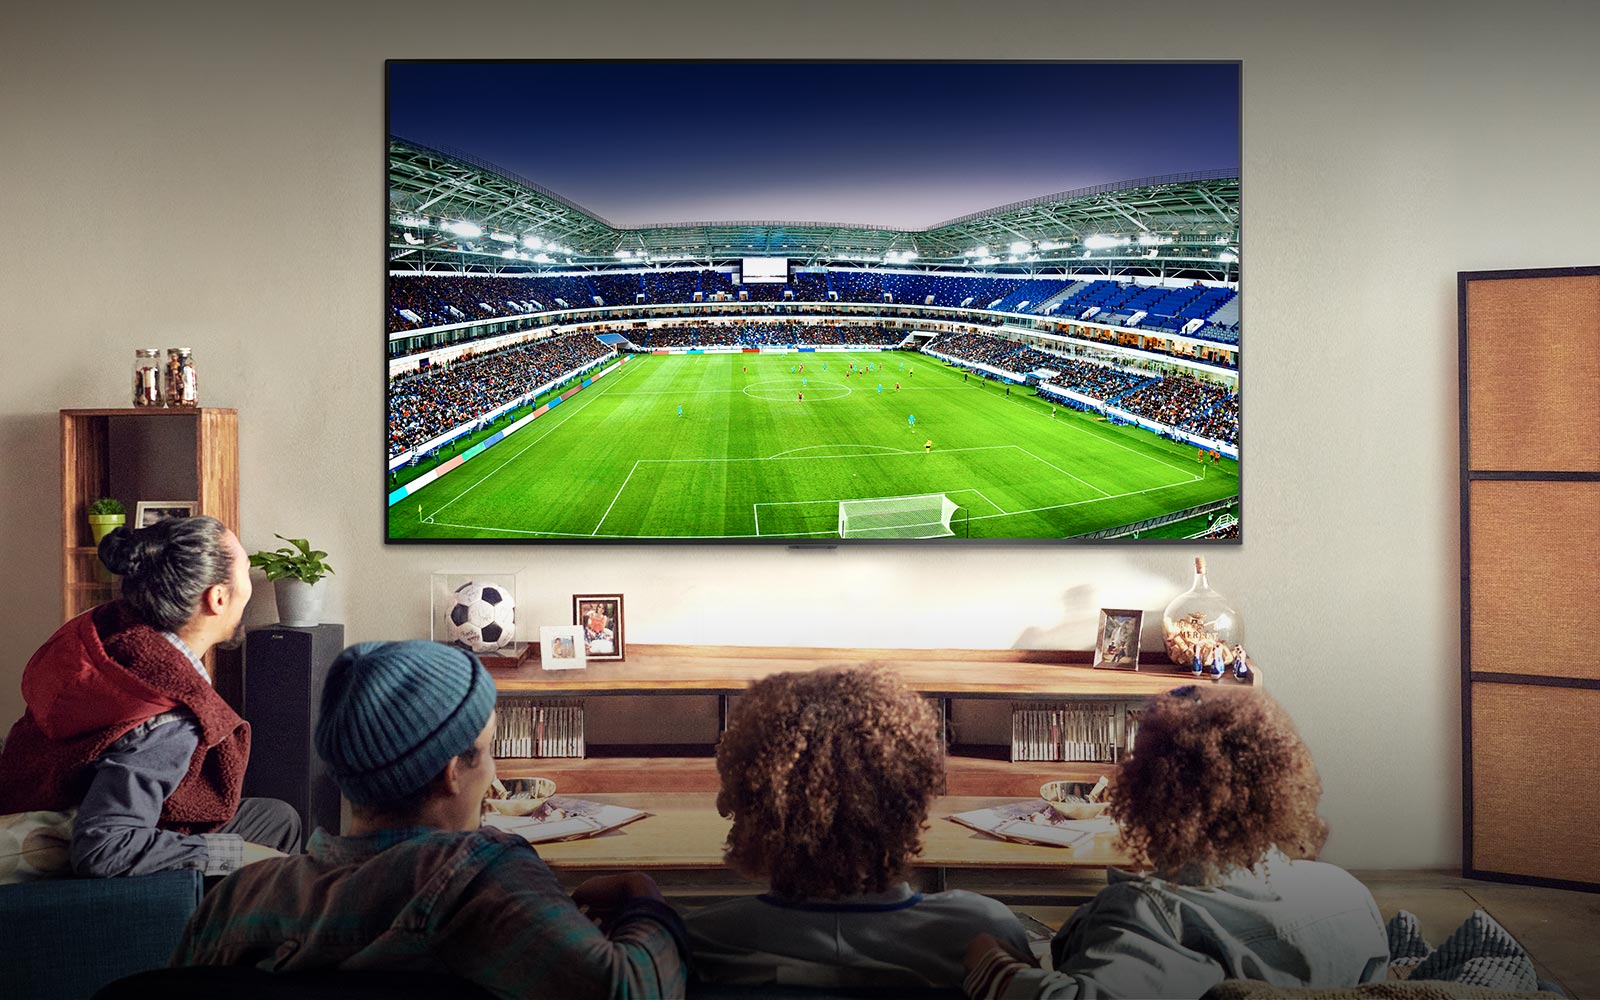 Four people sitting on a couch watching a large screen TV displaying a soccer stadium filled with spectators.